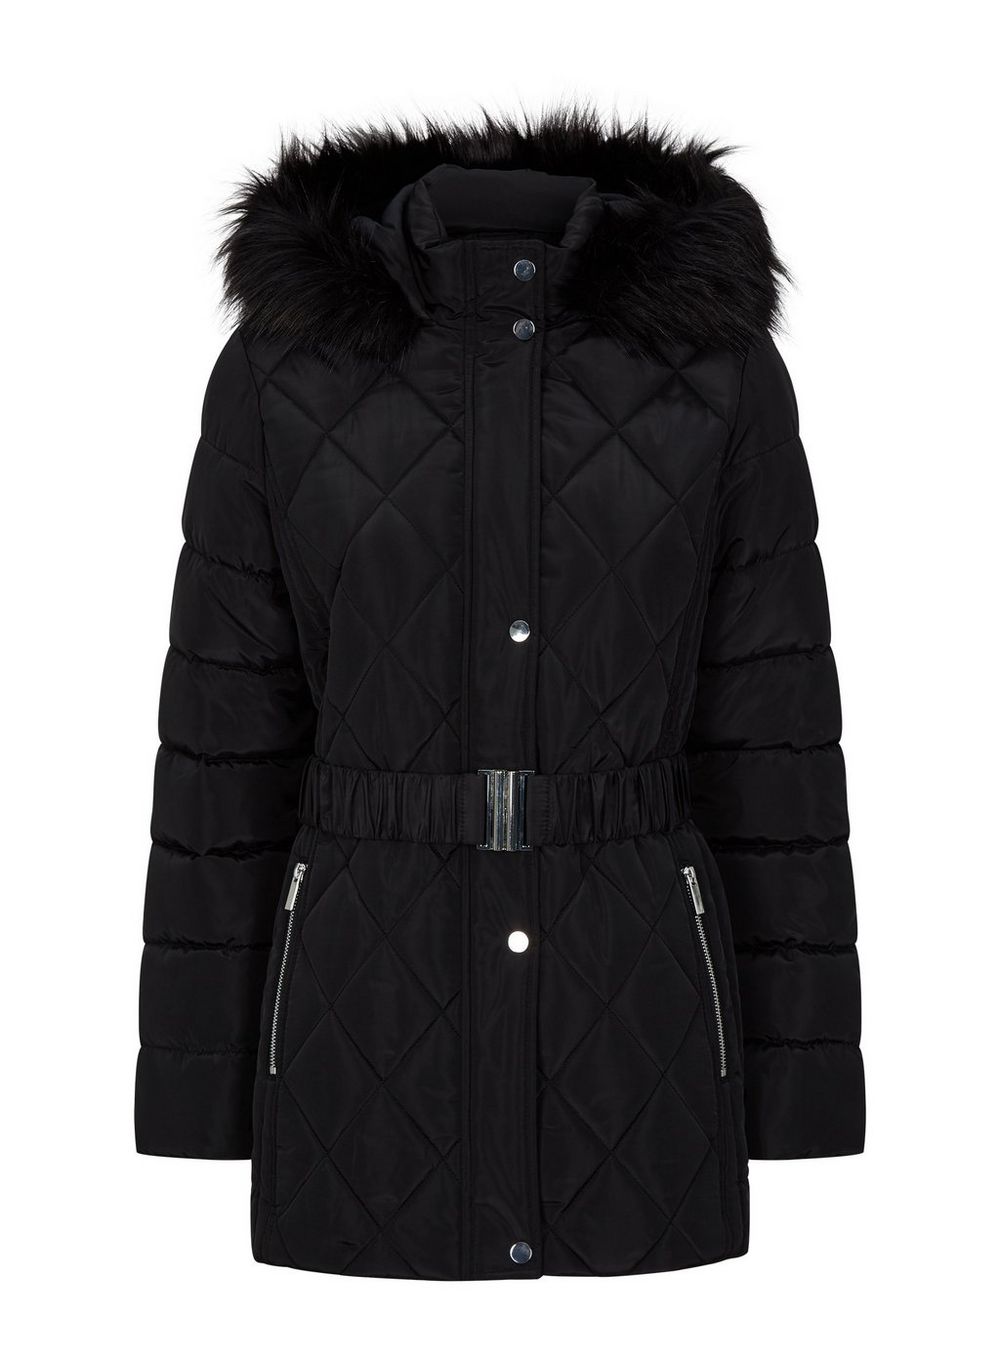 Dorothy Perkins Short Lux Padded Coat - 3 Colours